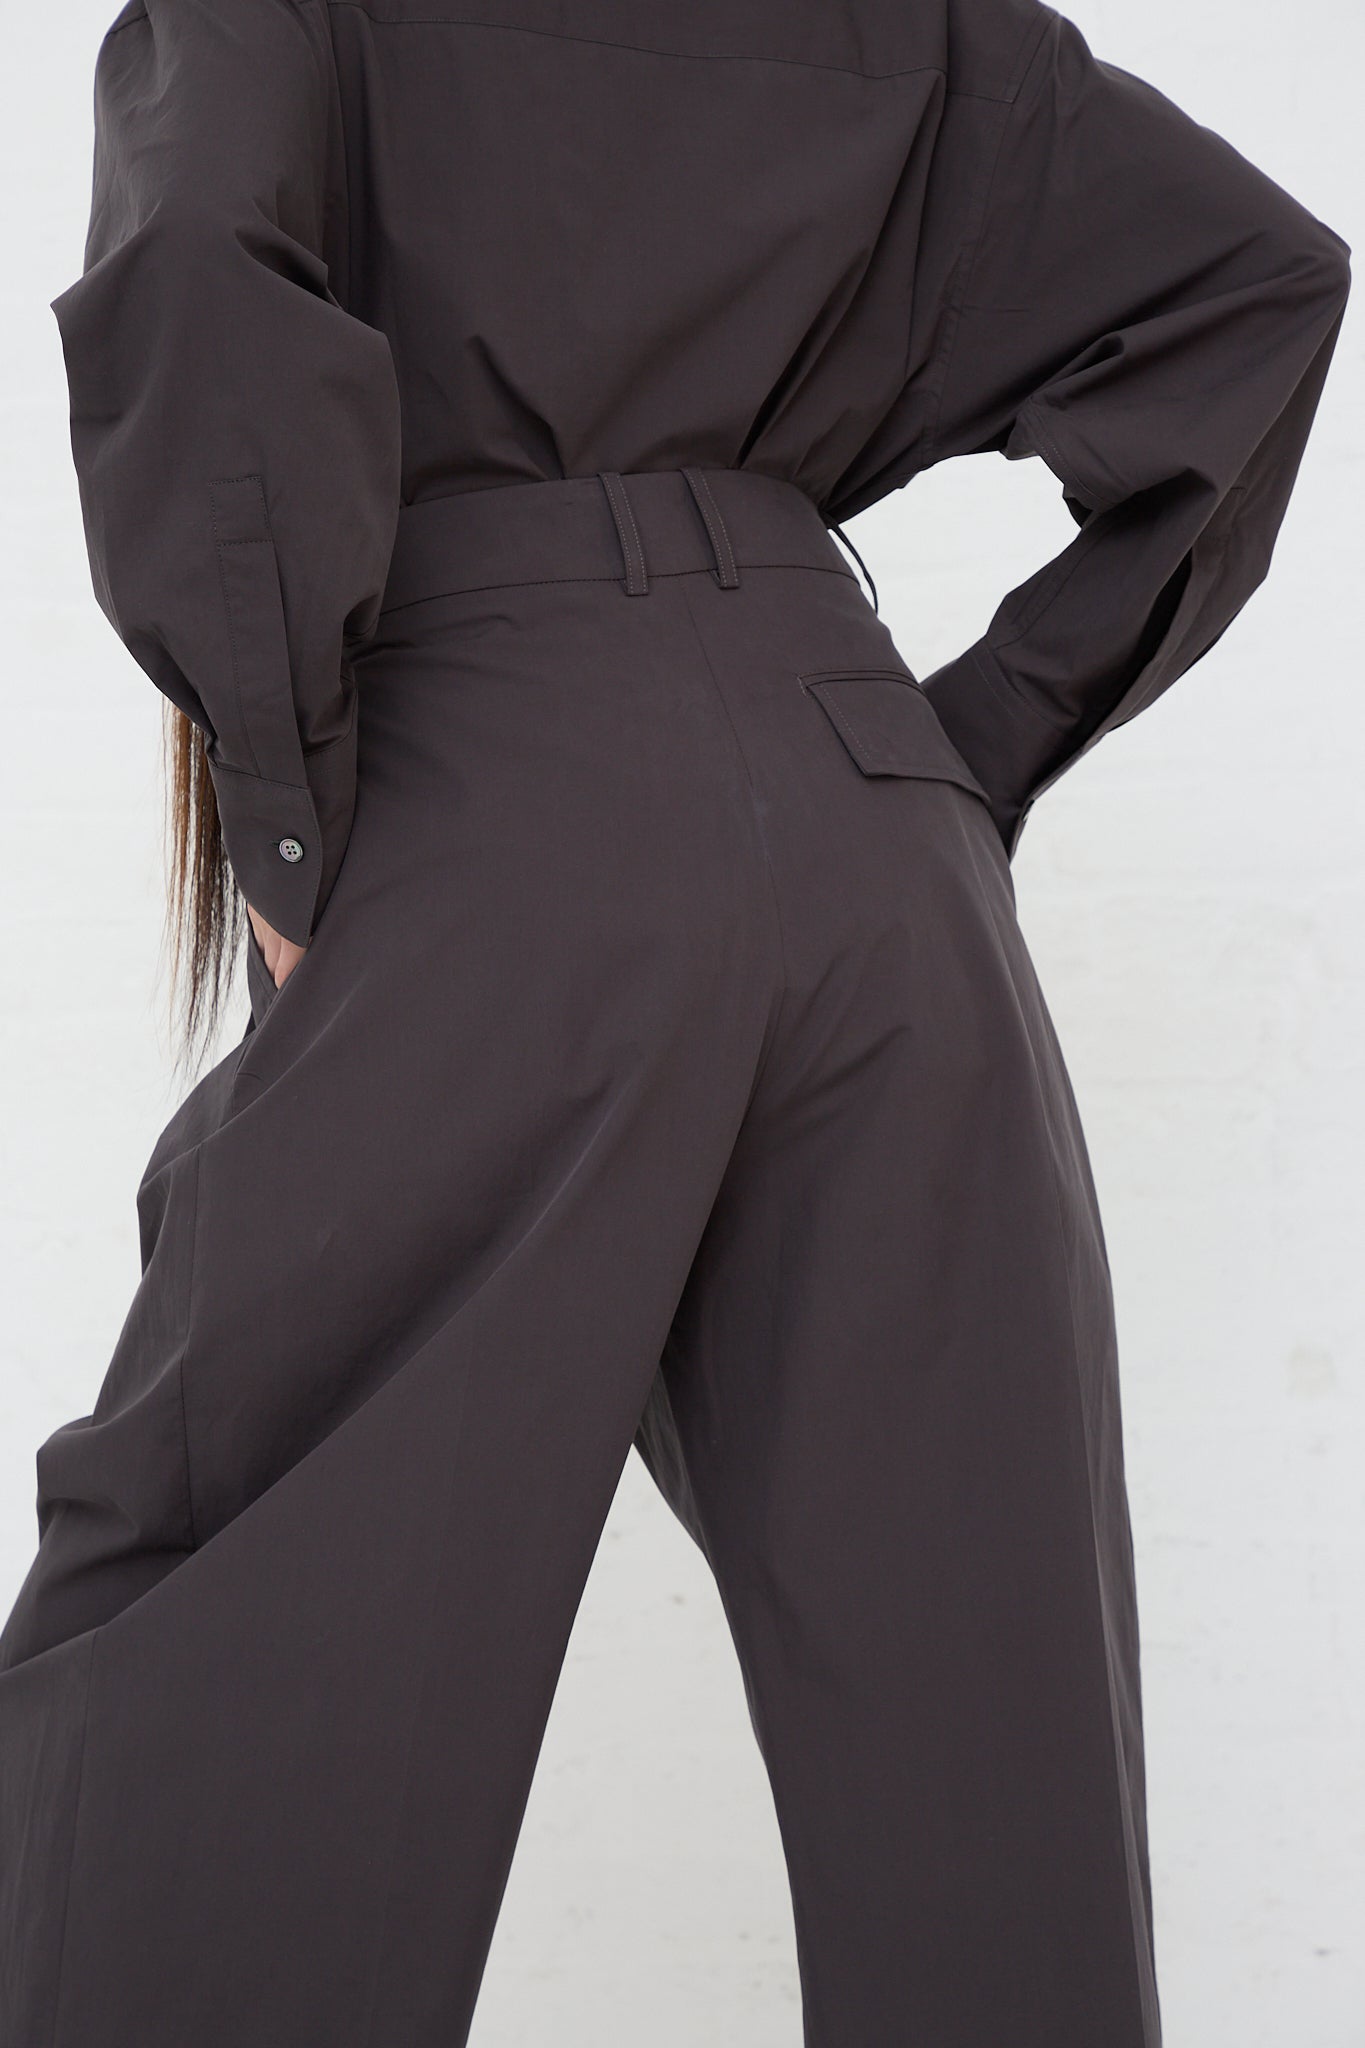 The back of a woman wearing Studio Nicholson's Acuna Double Pleat Front Trouser in Asphalt made of powder cotton.